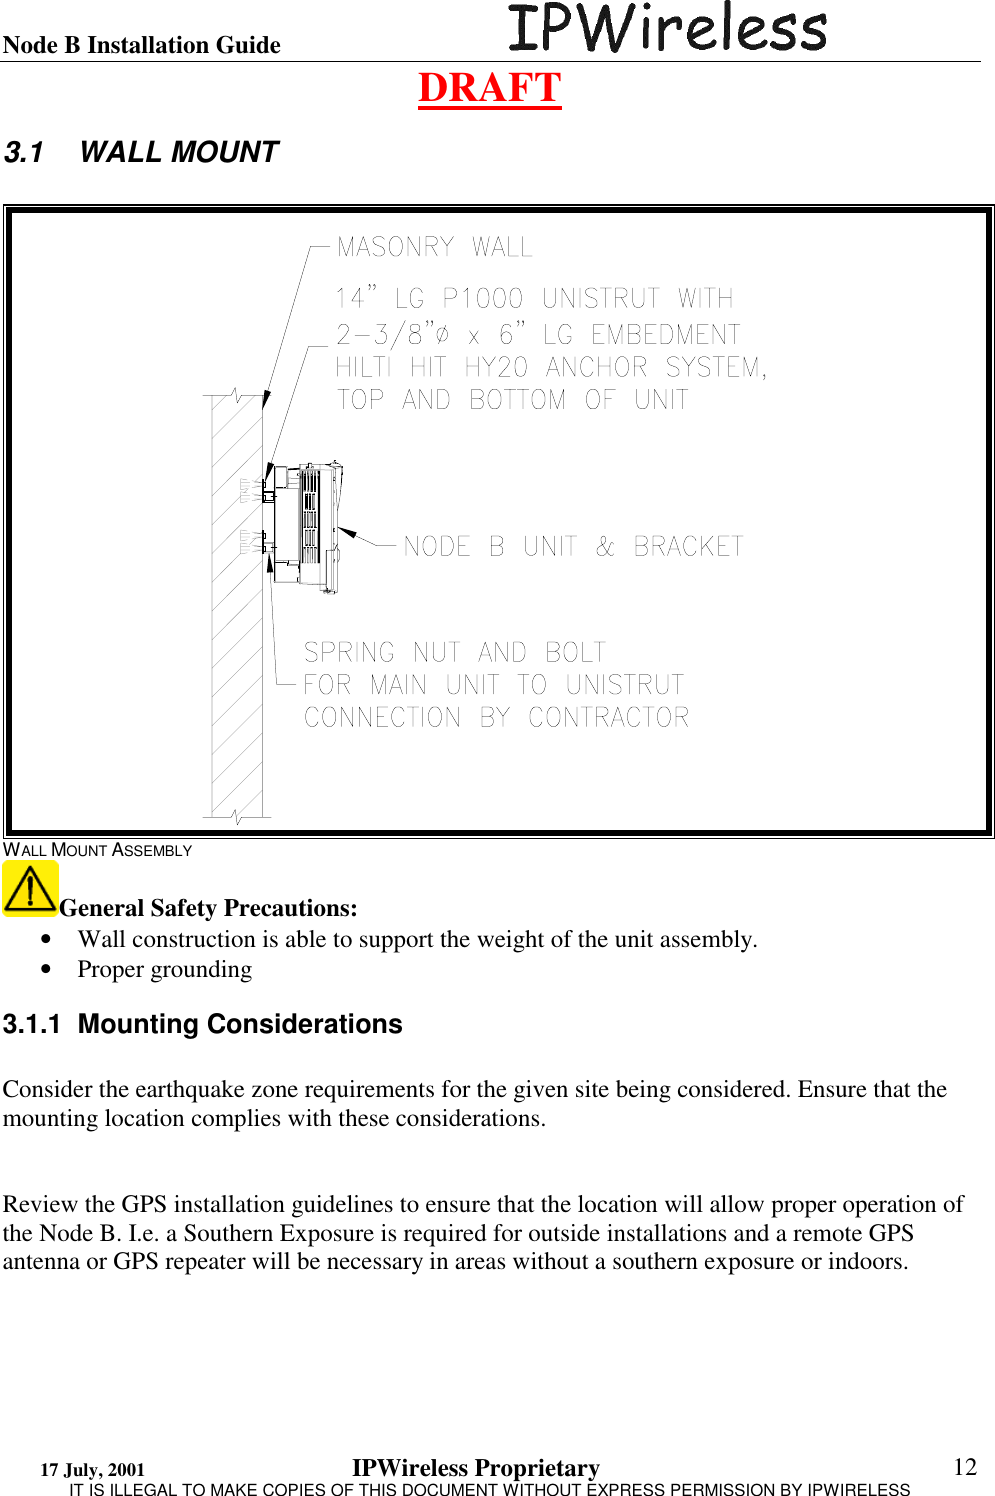 Node B Installation Guide                                      DRAFT 17 July, 2001                                 IPWireless Proprietary                                                  IT IS ILLEGAL TO MAKE COPIES OF THIS DOCUMENT WITHOUT EXPRESS PERMISSION BY IPWIRELESS  12 3.1 WALL MOUNT  WALL MOUNT ASSEMBLY General Safety Precautions: •  Wall construction is able to support the weight of the unit assembly. •  Proper grounding 3.1.1 Mounting Considerations  Consider the earthquake zone requirements for the given site being considered. Ensure that the mounting location complies with these considerations.   Review the GPS installation guidelines to ensure that the location will allow proper operation of the Node B. I.e. a Southern Exposure is required for outside installations and a remote GPS antenna or GPS repeater will be necessary in areas without a southern exposure or indoors.  